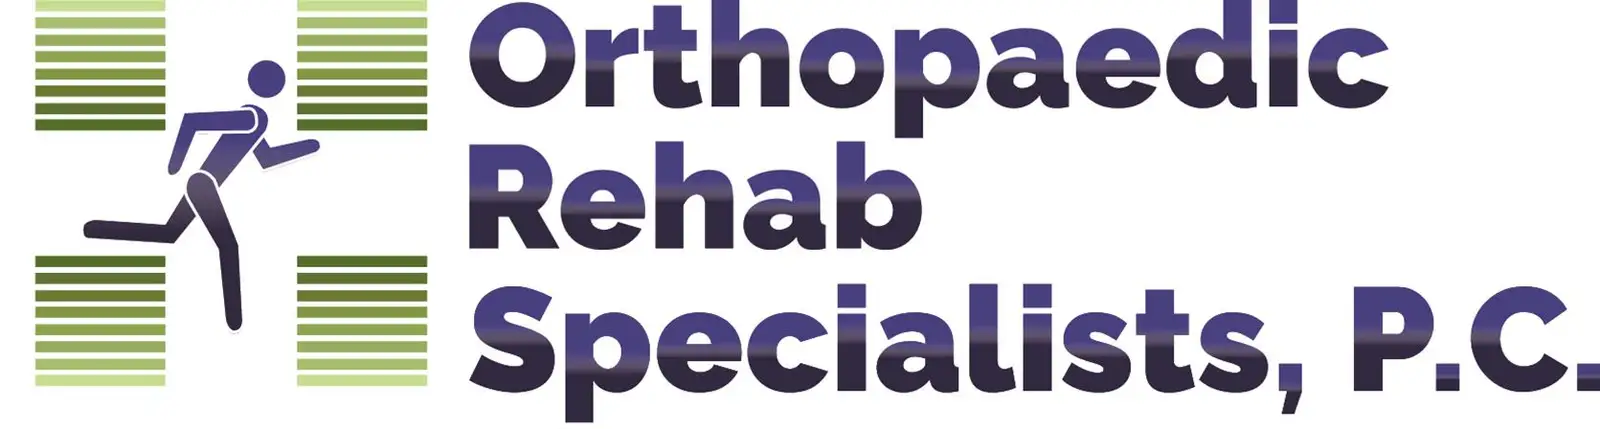 Orthopaedic Rehab Specialists Physical Therapy logo